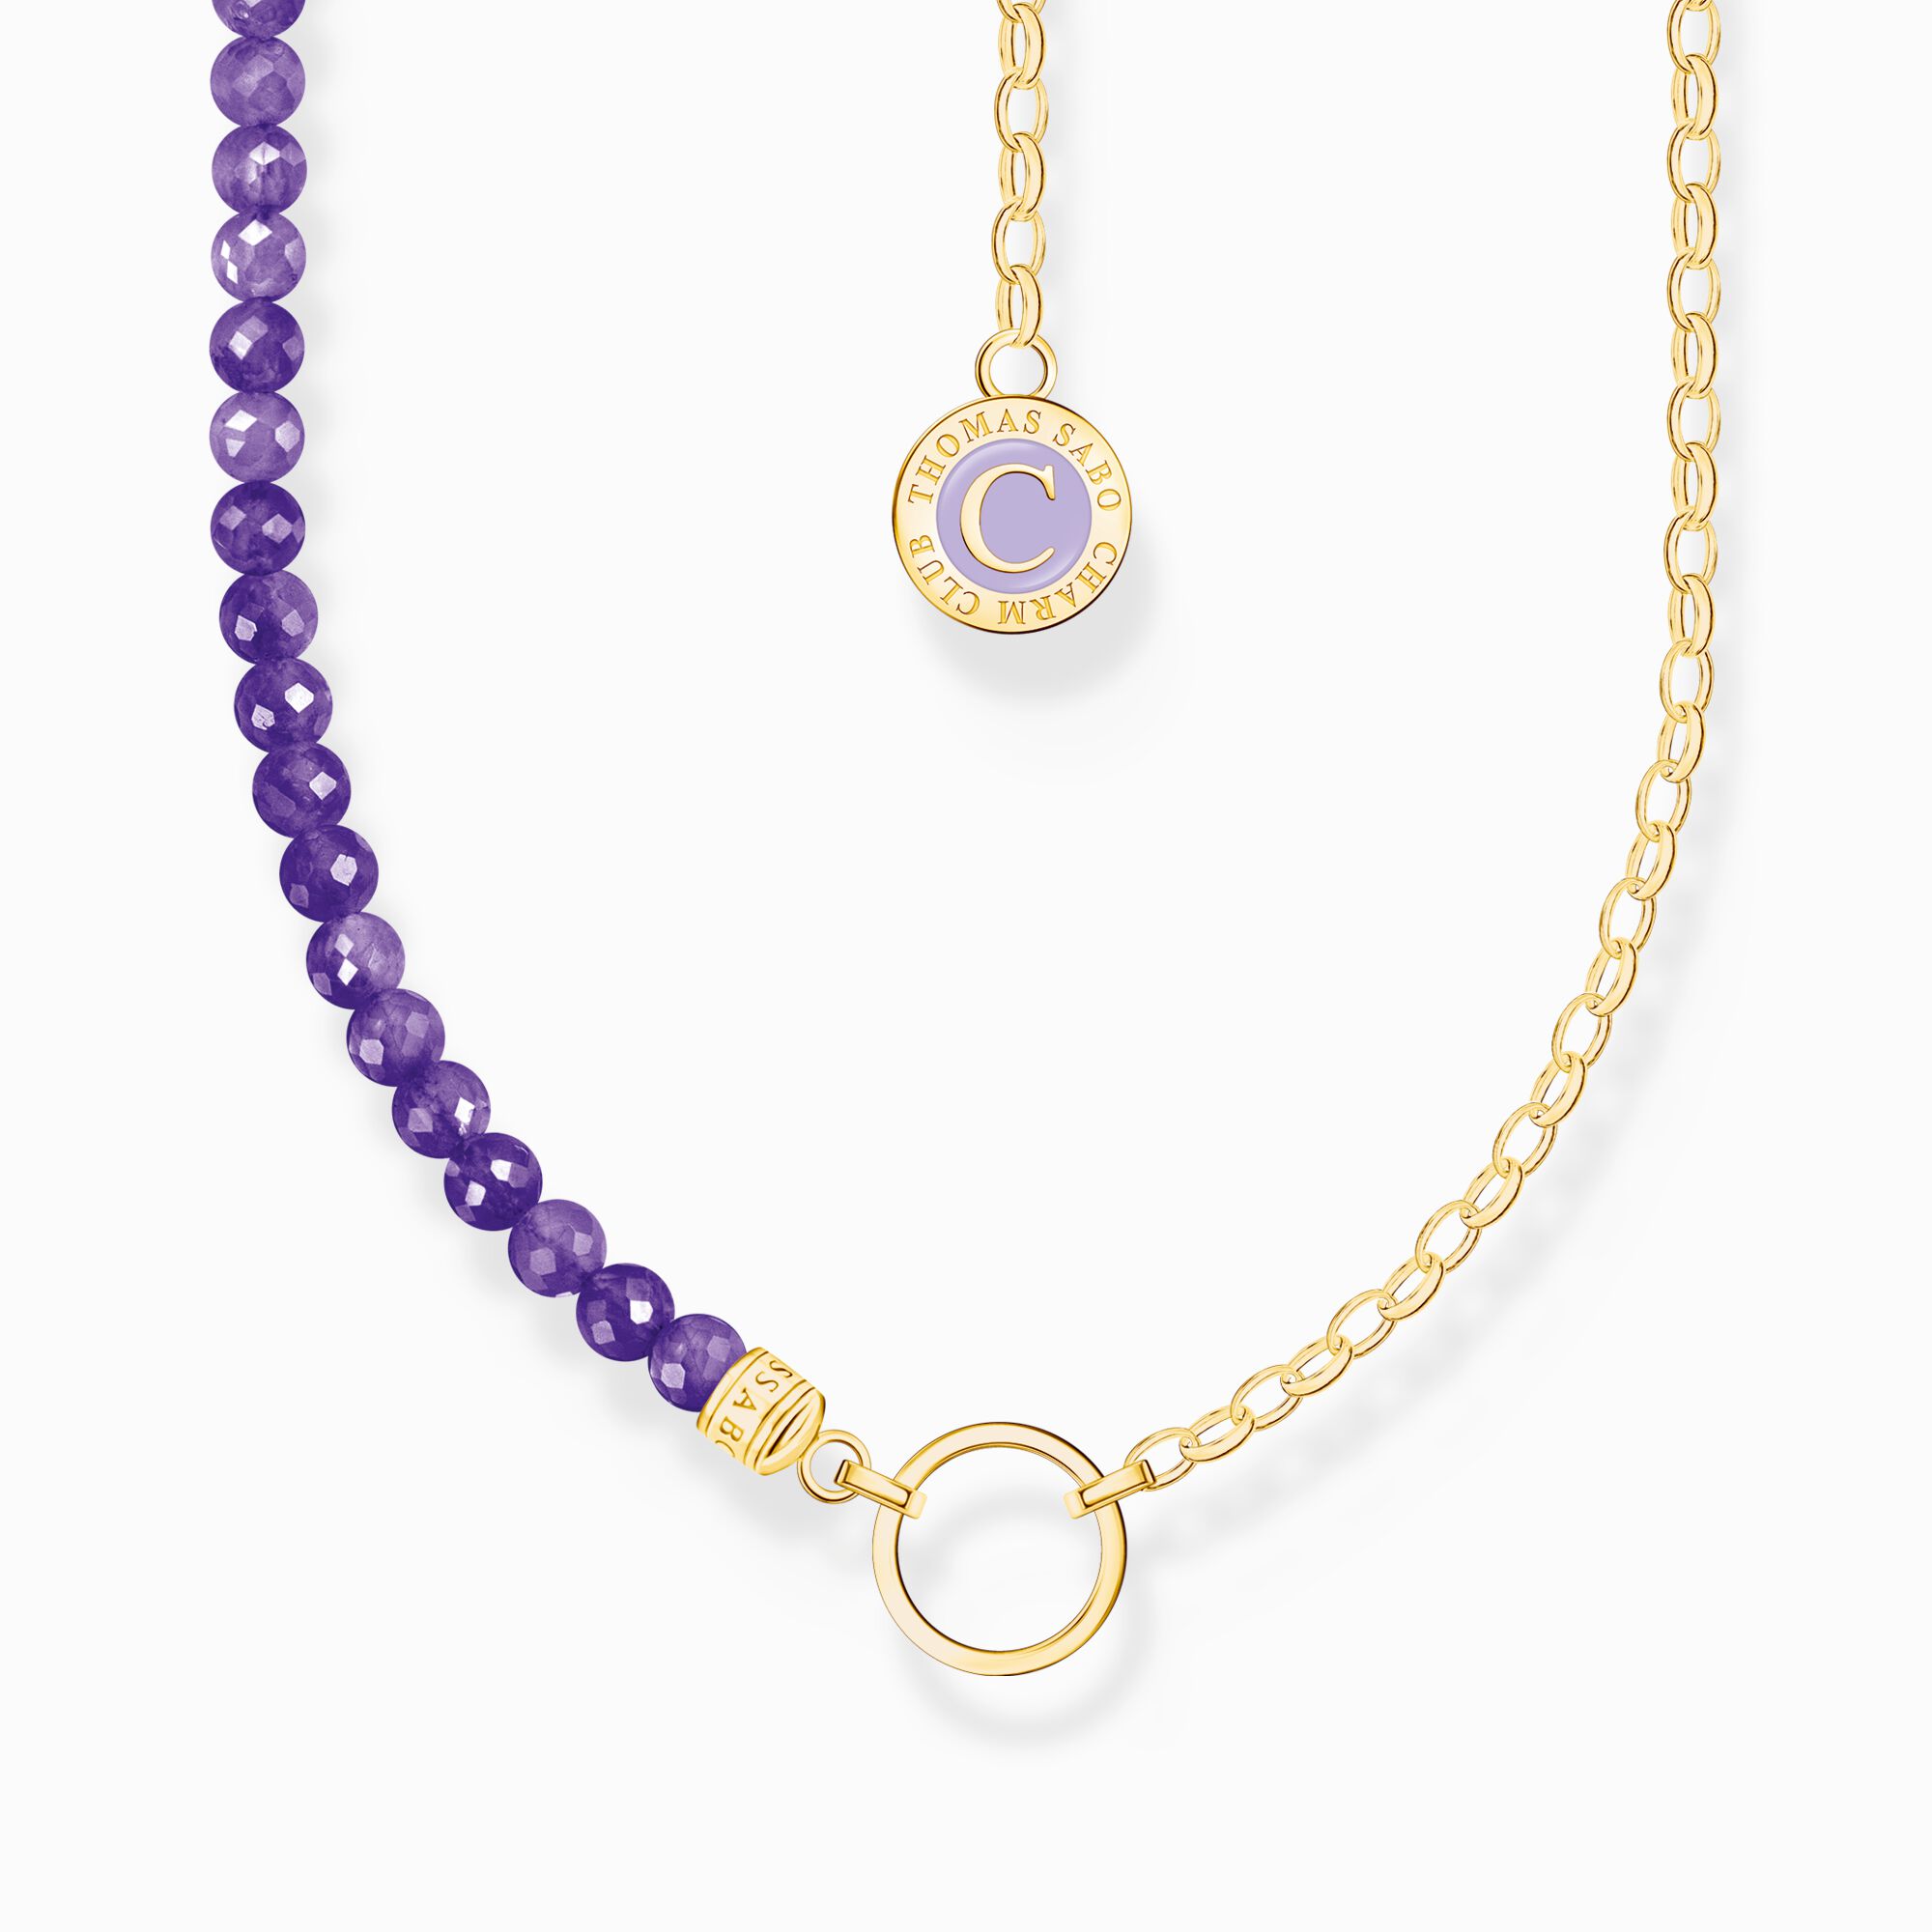 Member Charm necklace with violet beads yellow-gold plated from the Charm Club collection in the THOMAS SABO online store